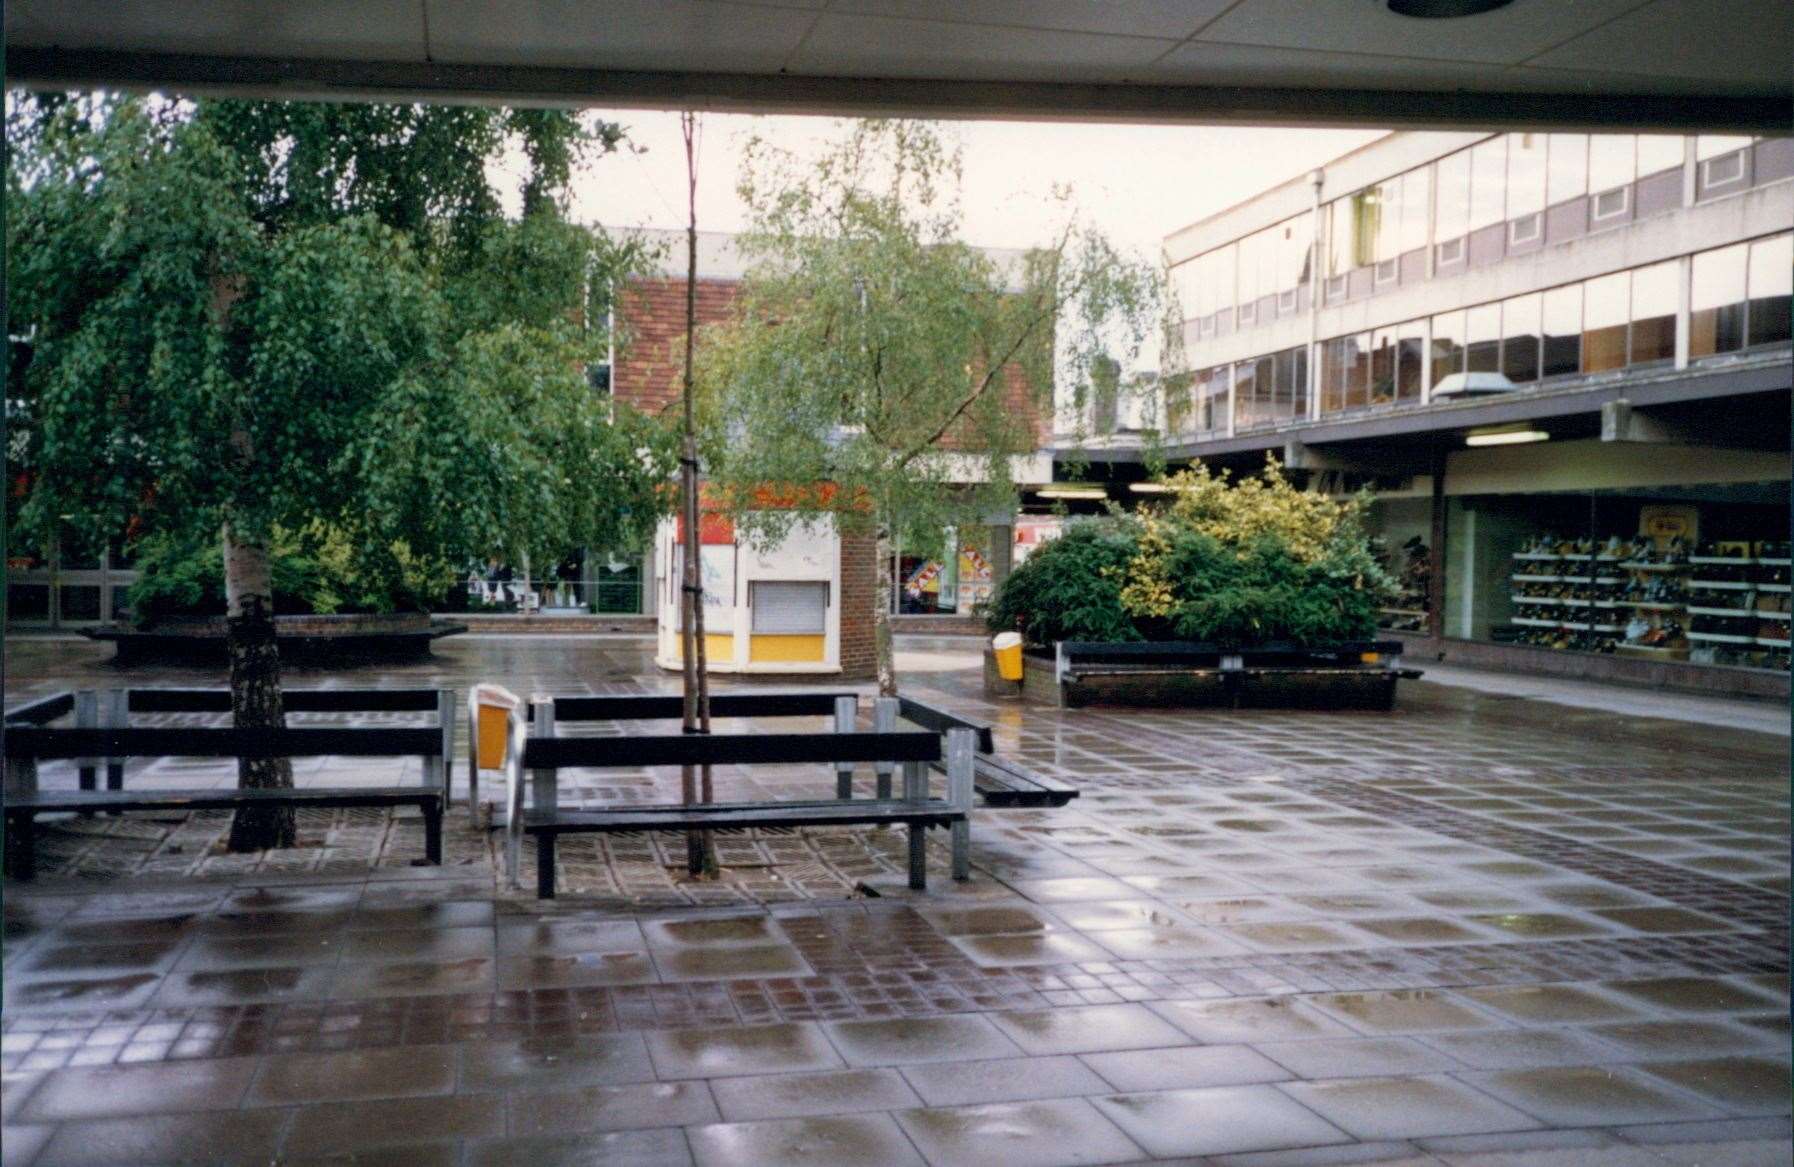 Another view of the Tufton Centre central square taken outside Littlewoods. It shows Peacocks and the Marshall shop beyond the trees and Manfield Shoes on the right. Picture: Steve Salter